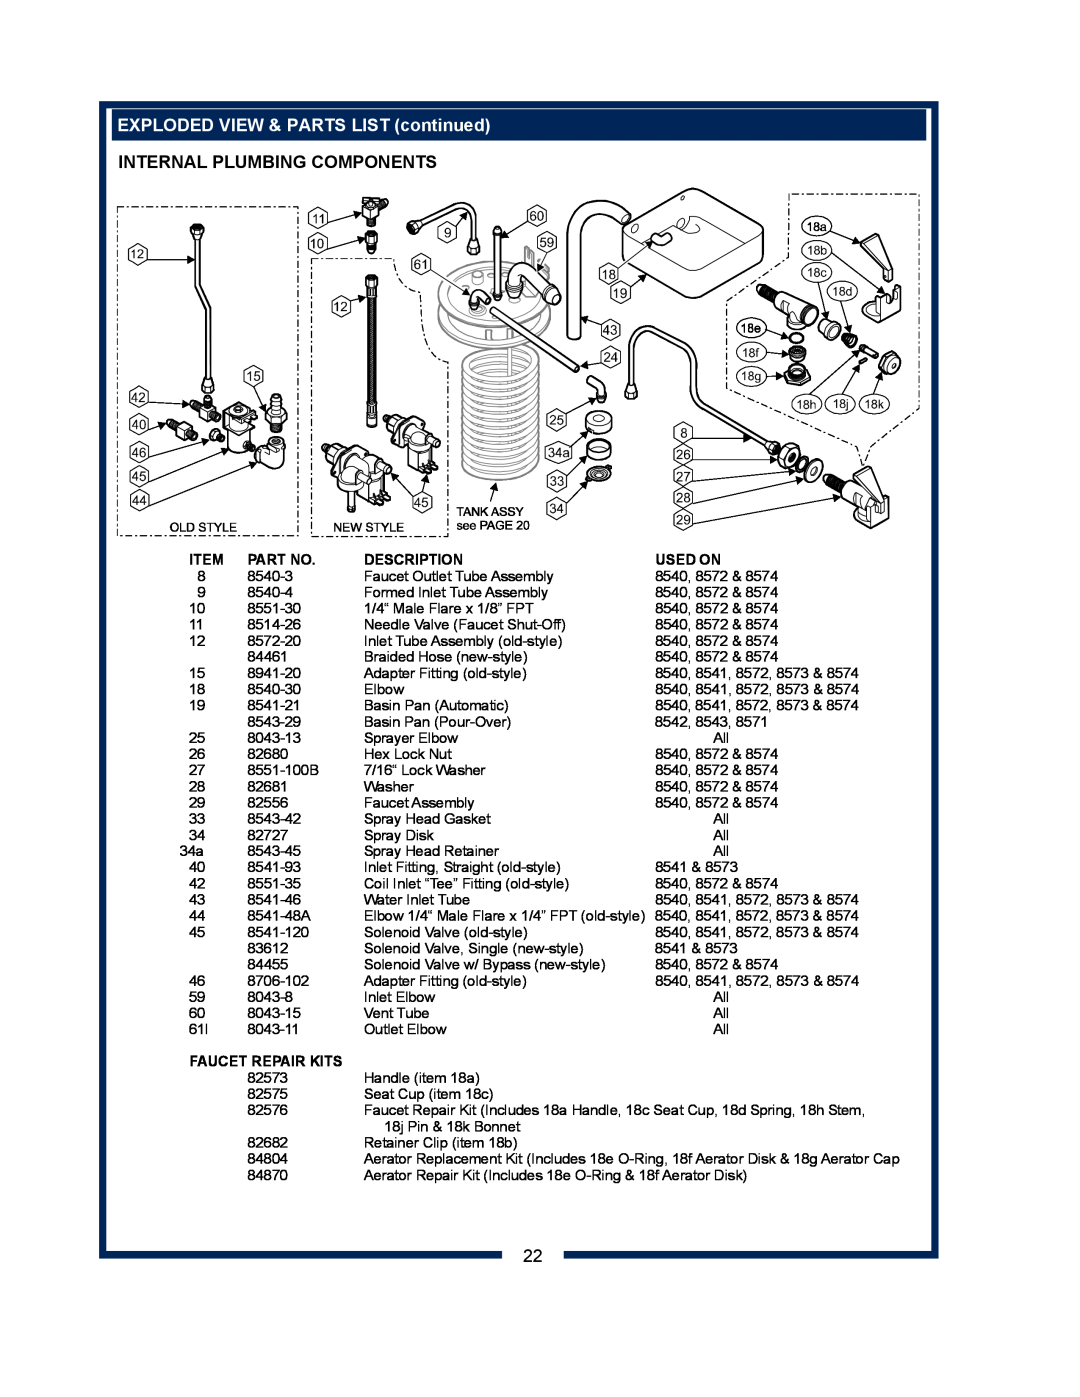 Bloomfield 8540, 8541, 8542, 8573 Internal Plumbing Components, EXPLODED VIEW & PARTS LIST continued, Description, Used On 